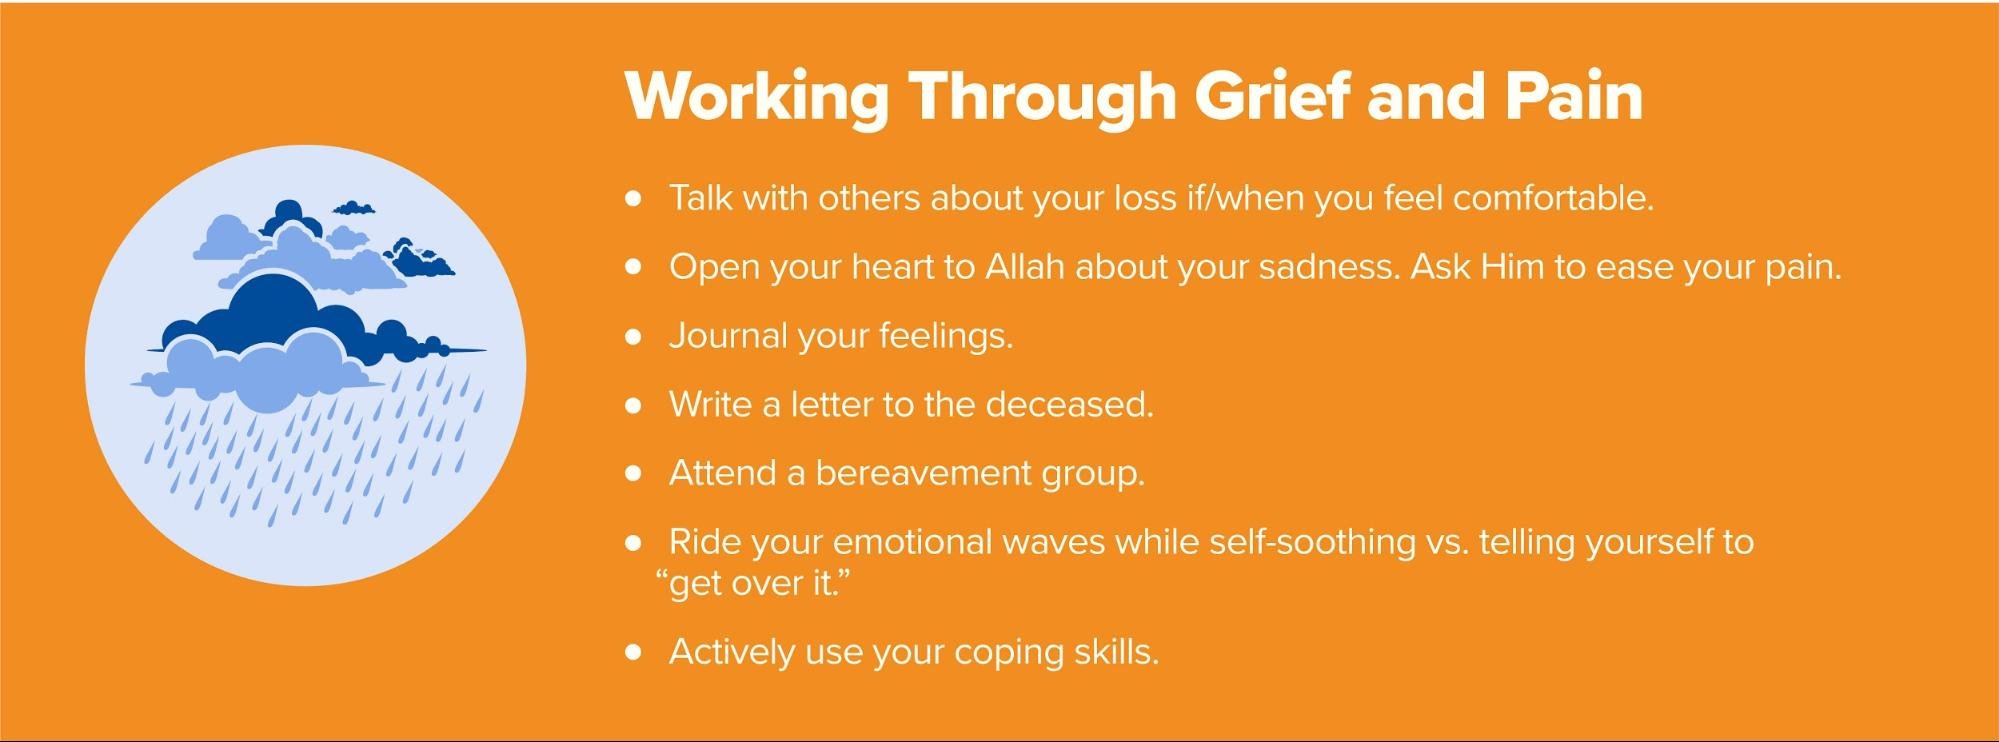 Steps on how to work through grief and pain